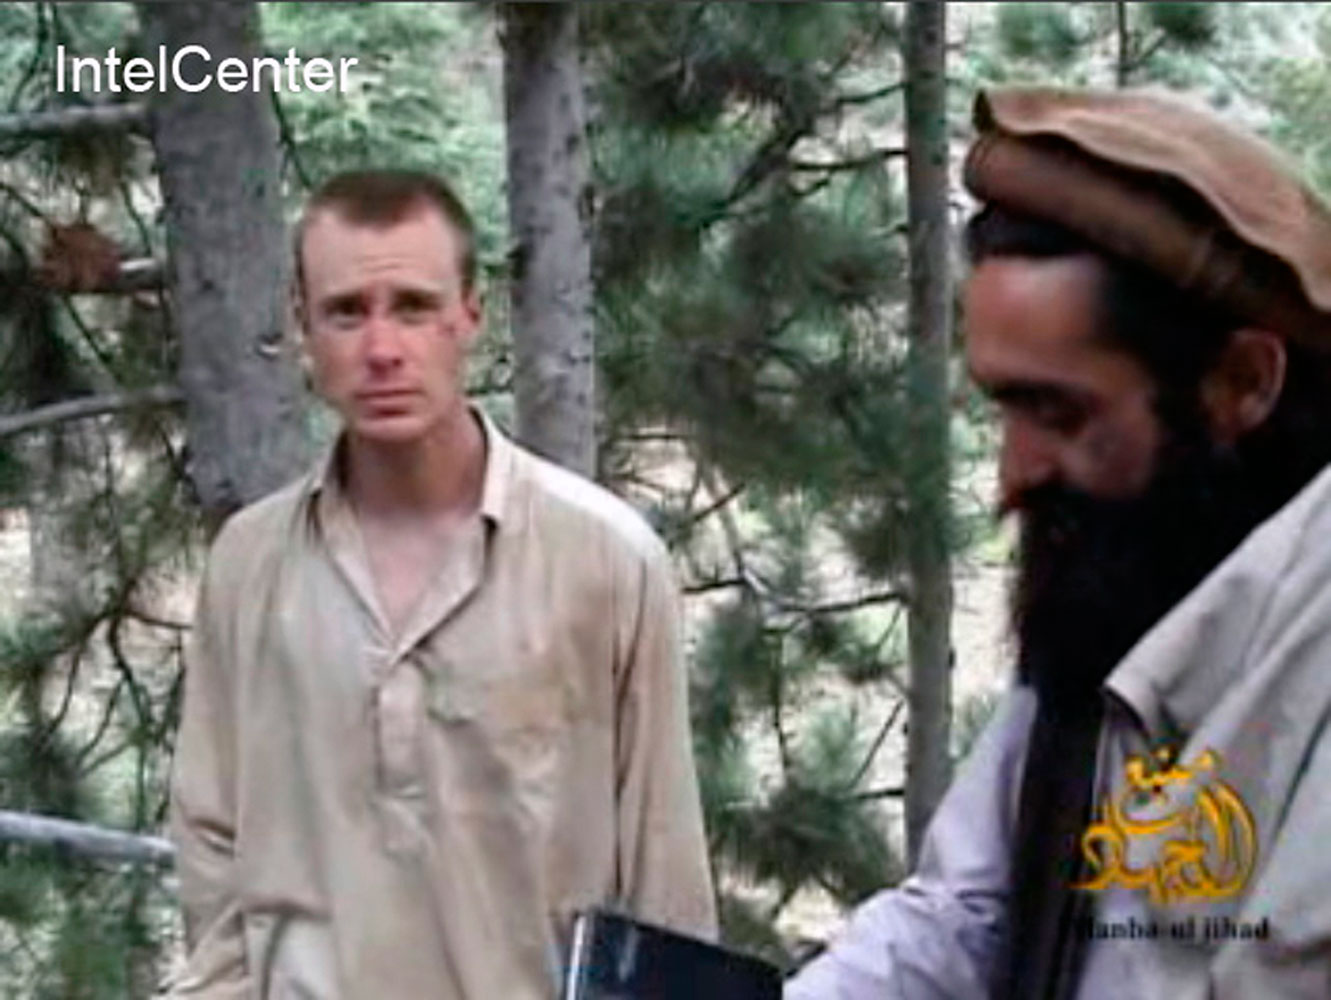 This file image provided by IntelCenter on Dec. 8, 2010, shows a frame grab from a video released by the Taliban containing footage of a man believed to be Bowe Bergdahl, left. (IntelCenter/AP)